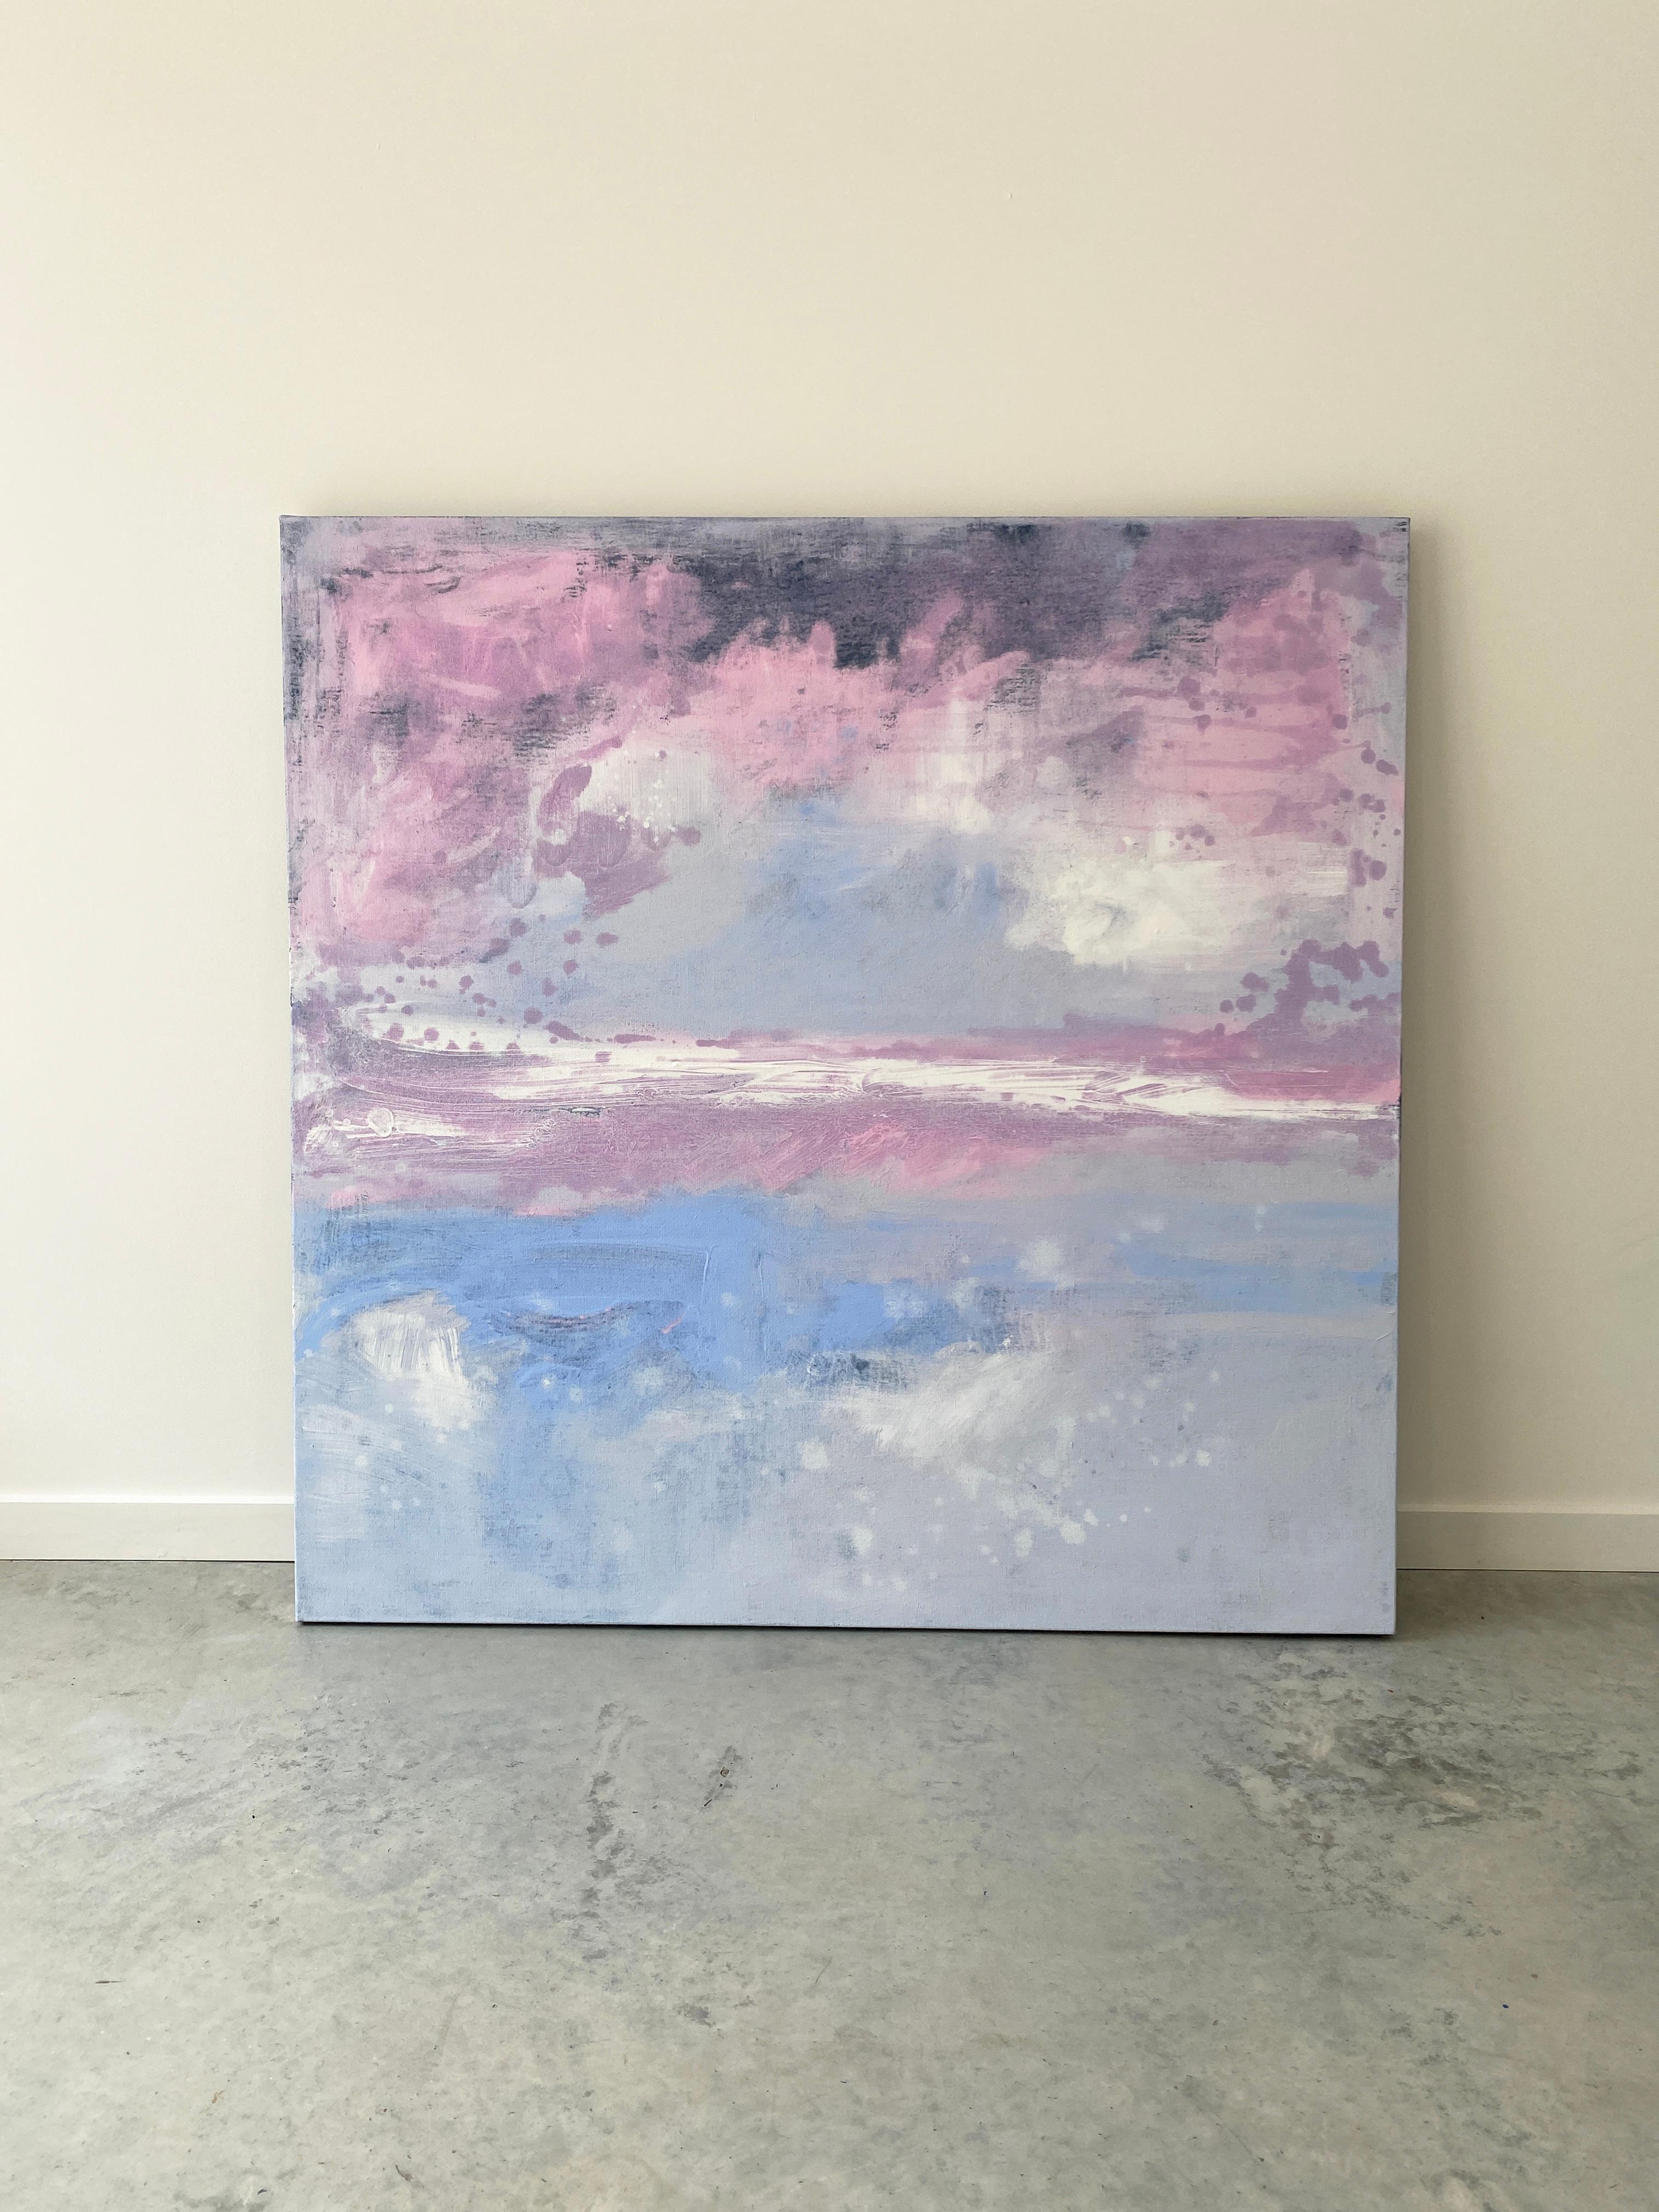 Night is falling blue pink ocean abstract landscape cloudy impressionism sky  - Painting by Kathleen Rhee